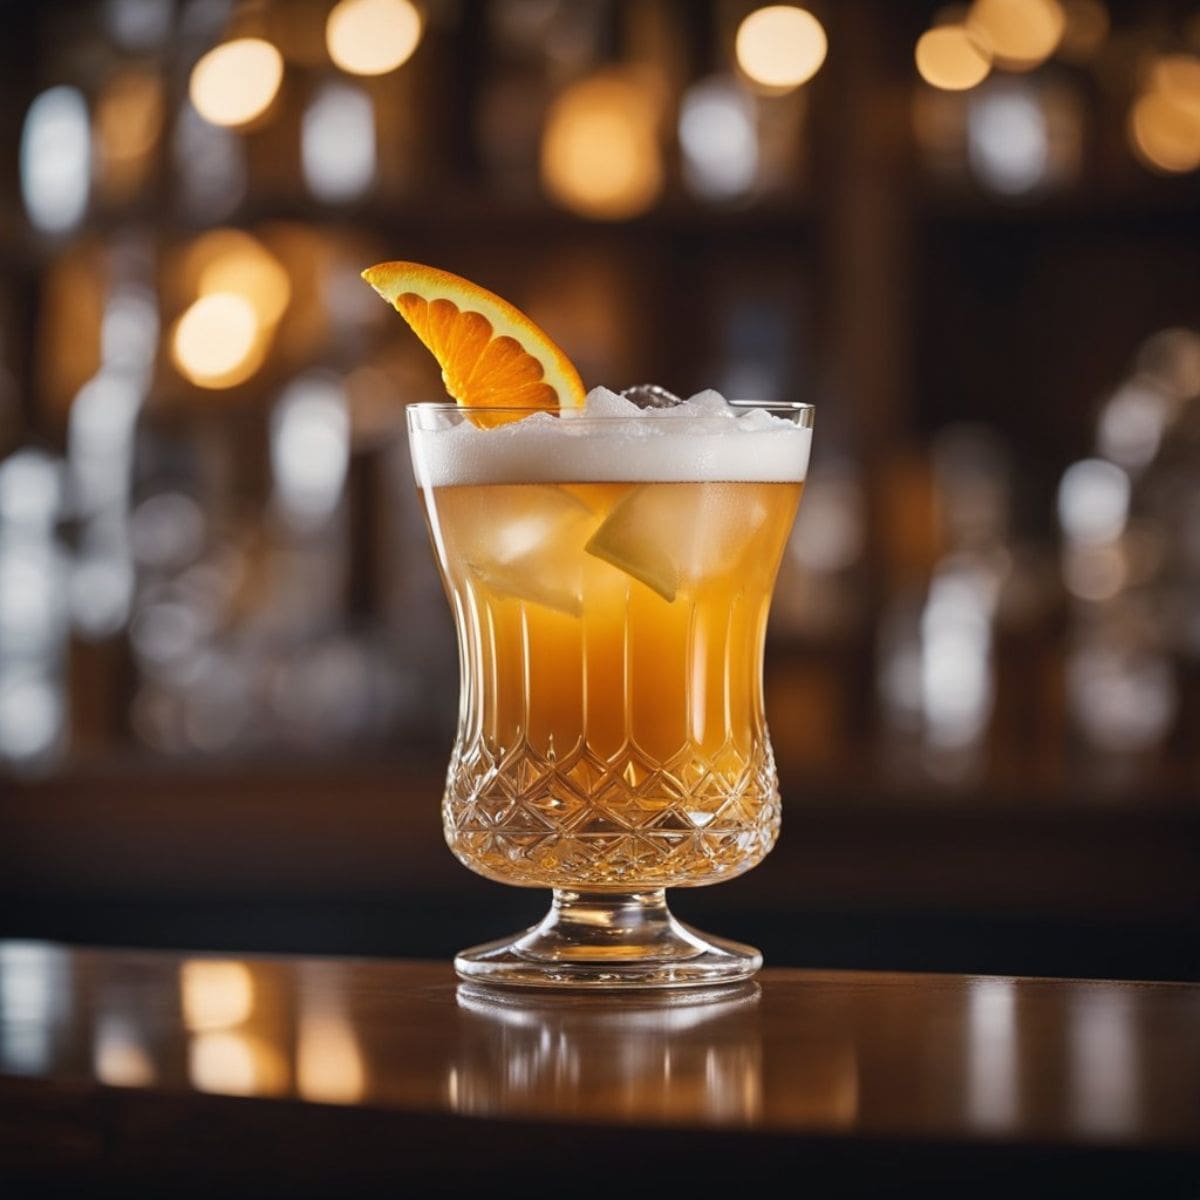 A close-up photo of a glass of spiced rum sidecar with a lemon slice on a bar counter.